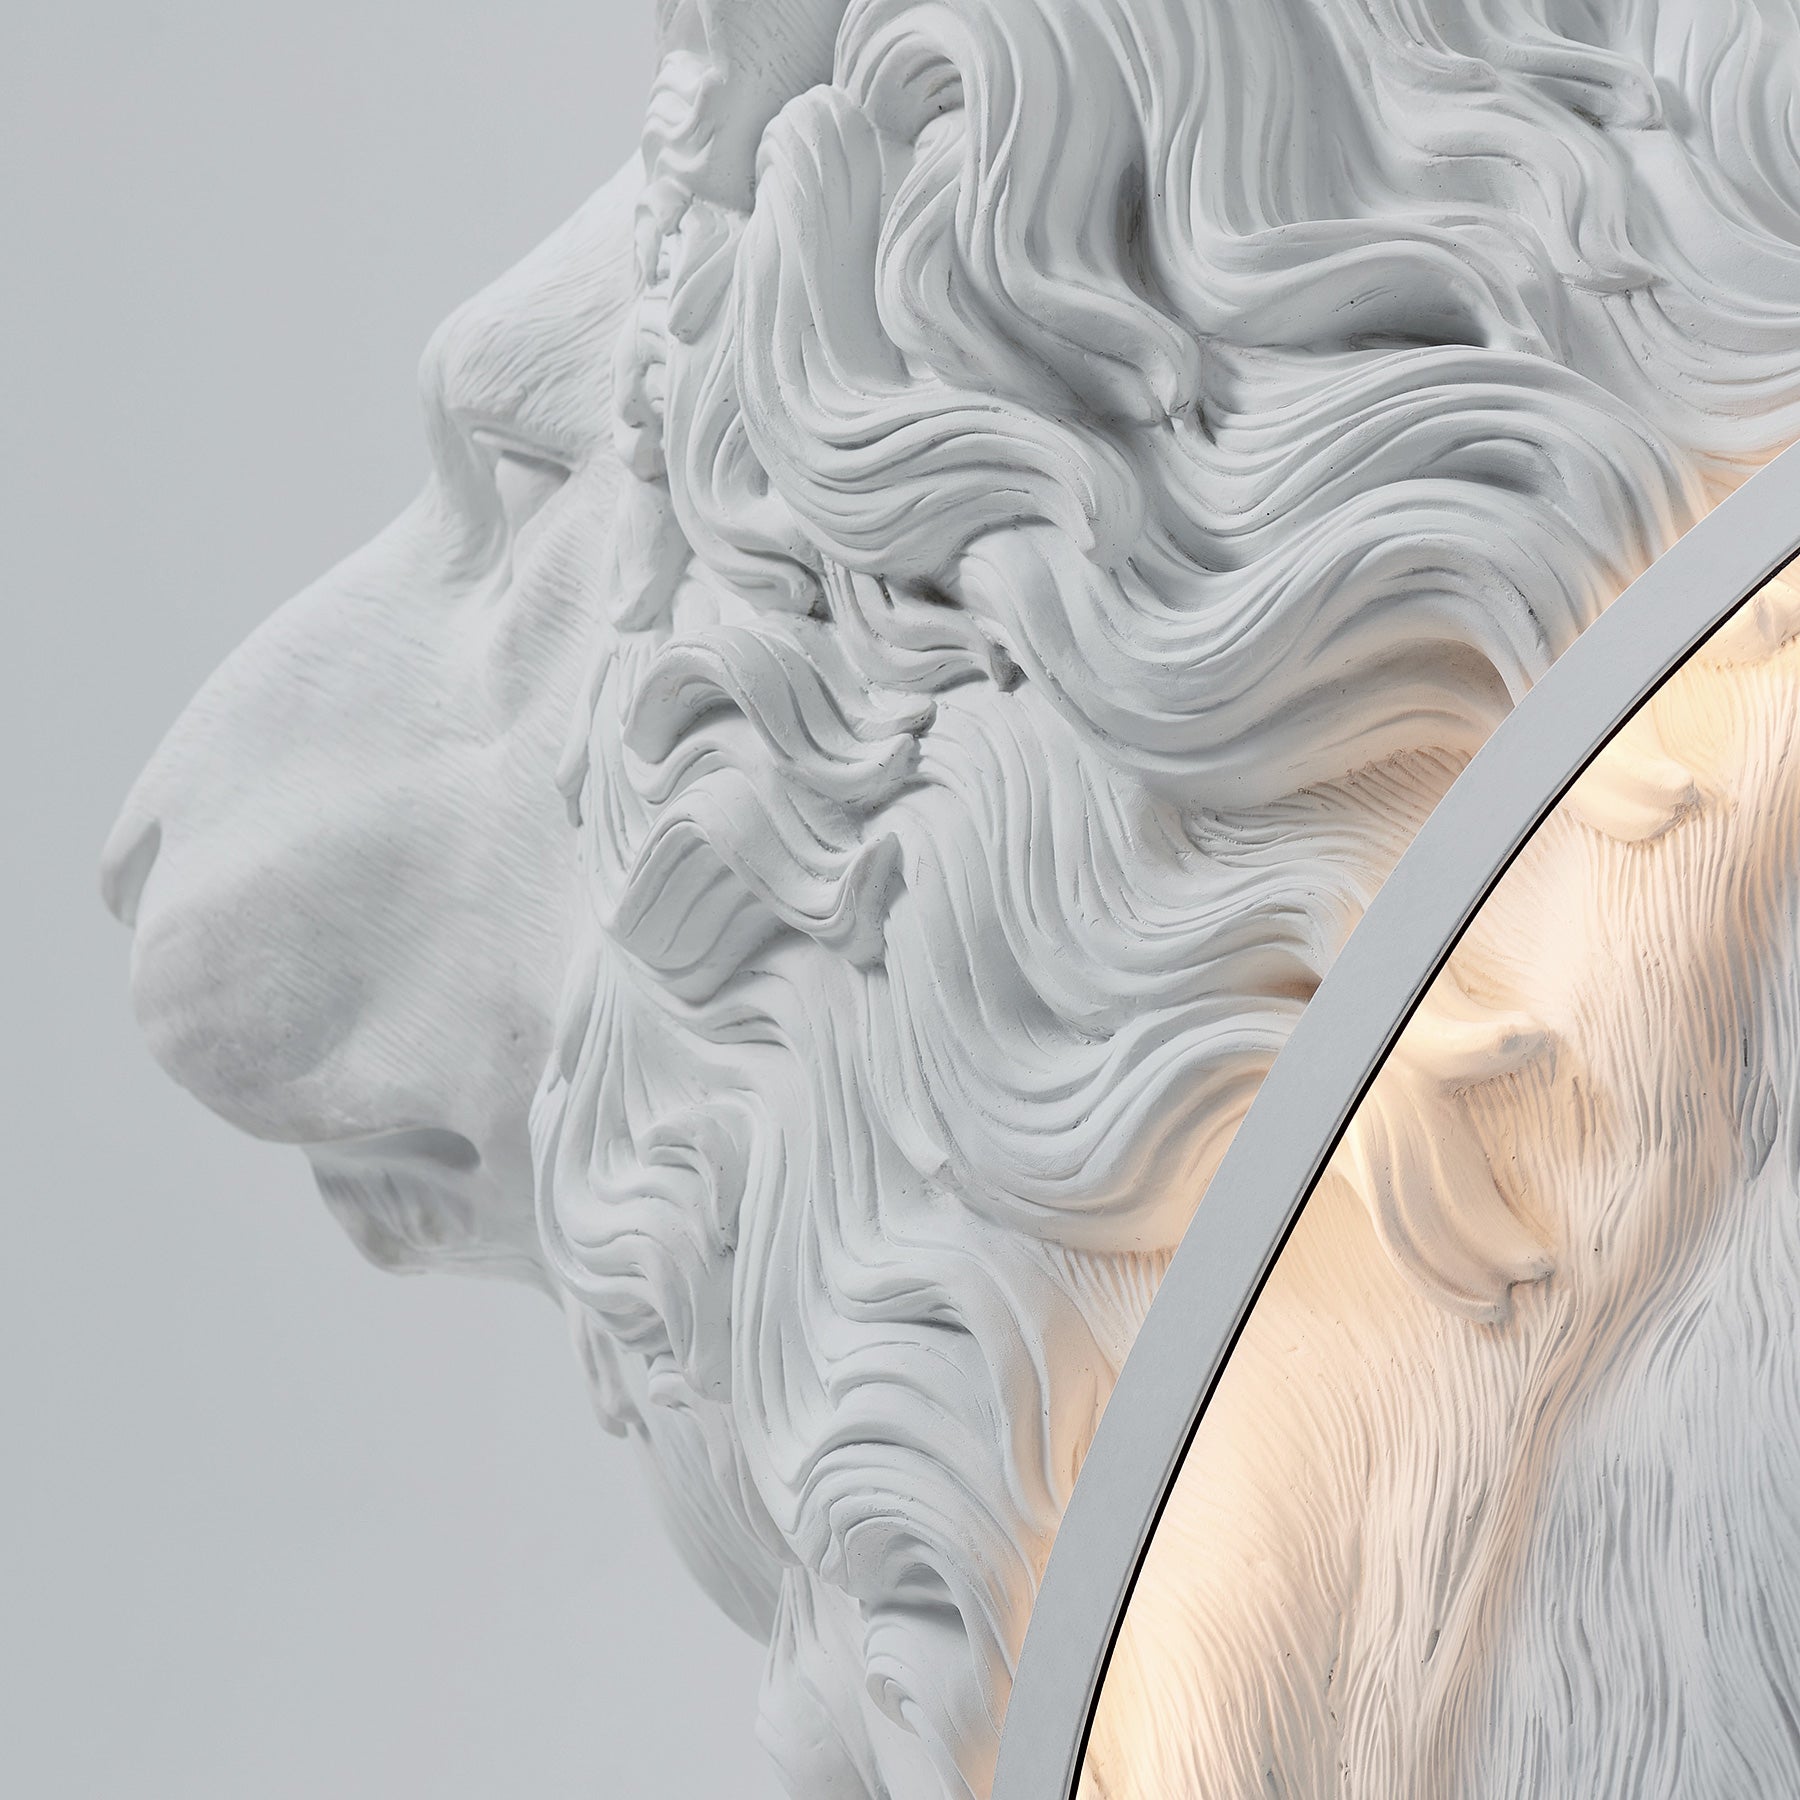 Lion Lamp with Home Decor Statue